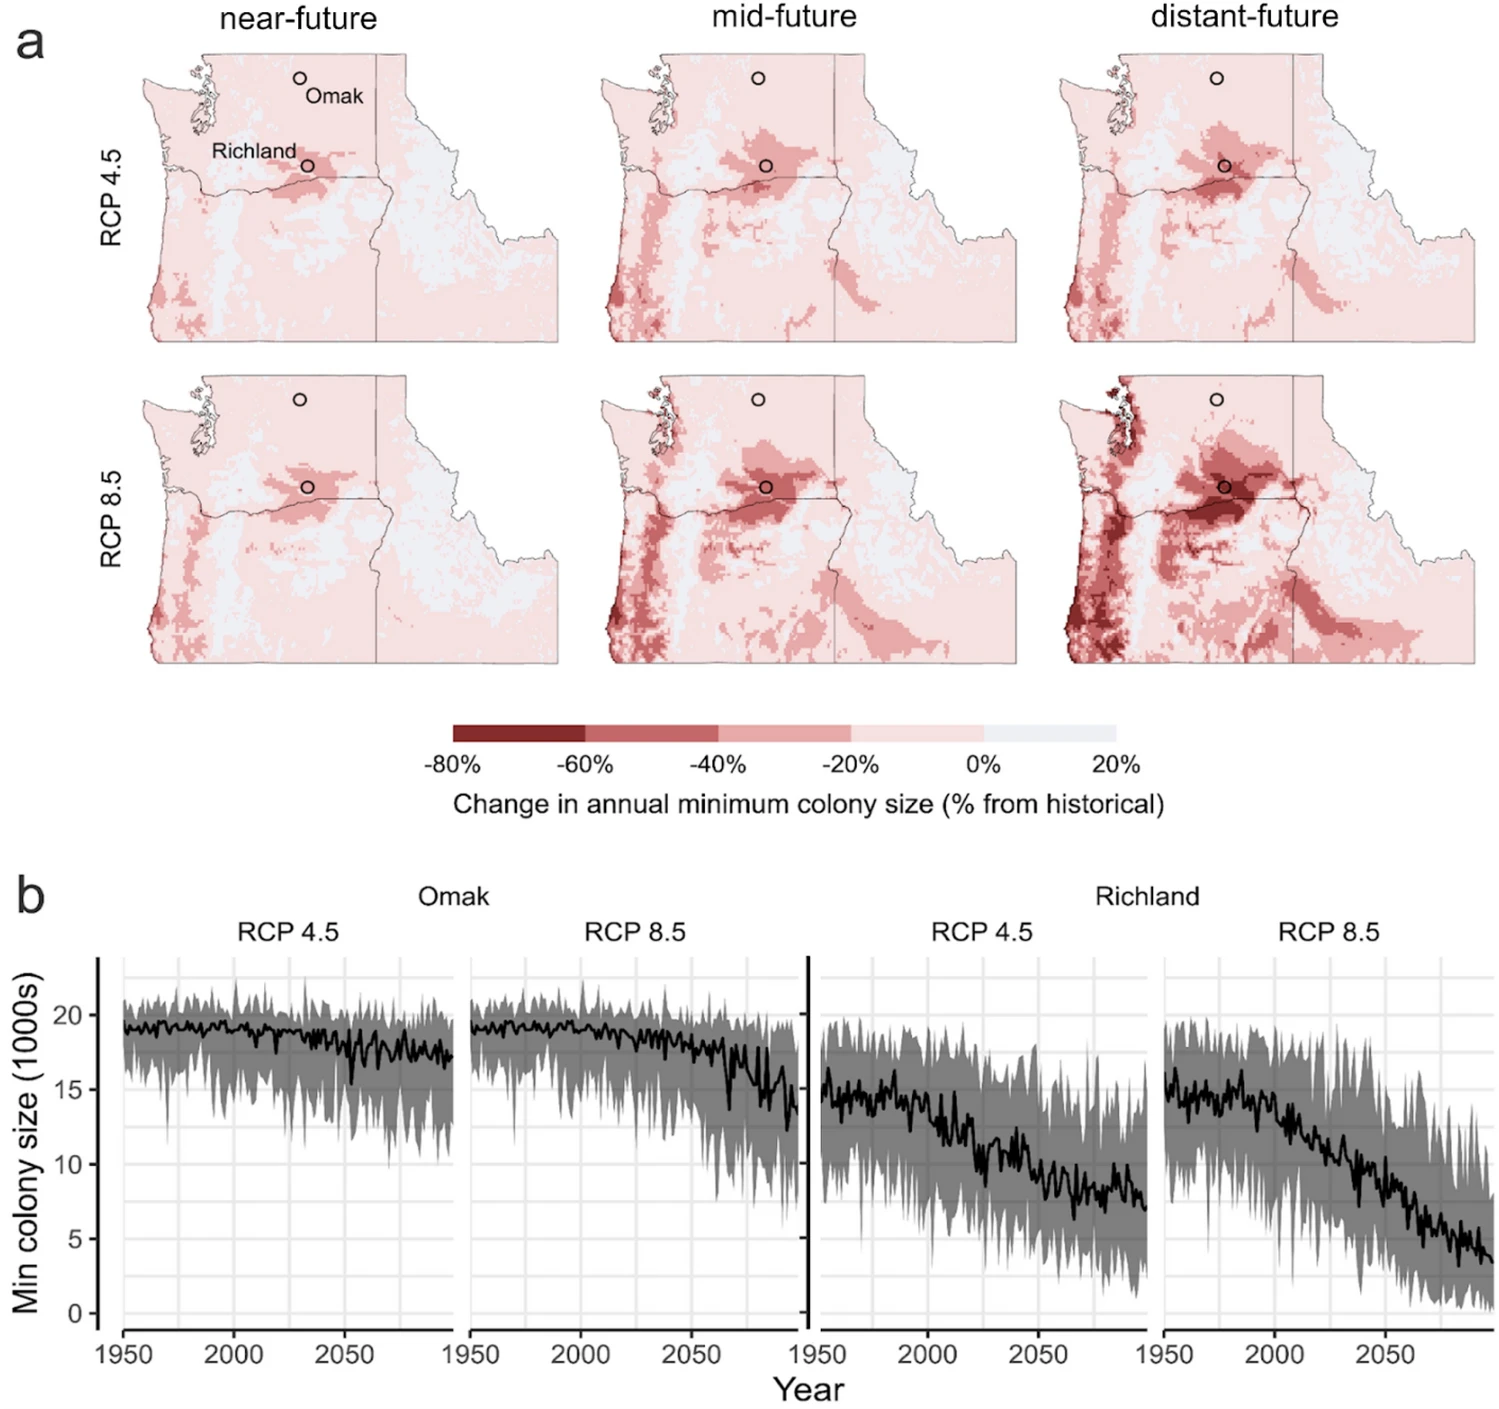 (a) Maps of the Pacific Northwest U.S. showing the percentage change in annual minimum colony size in the future time frames as compared to the historical time frames. Medians across 19 general circulation models are shown for each RCP. The years averaged for each time frame include 1975–2005 (historical), 2025-2055 (near-future), 2045–2075 (mid-future), and 2065–2095 (distant-future). (b) The time series of annual minimum colony size for two representative locations, Omak and Richland, and two RCPs. The black line in the middle is the median across all 19 general circulation models and the shaded area is reflective of the range of values from models. Graphic: Rajagopalan, et al., 2024 / Nature Scientific Reports